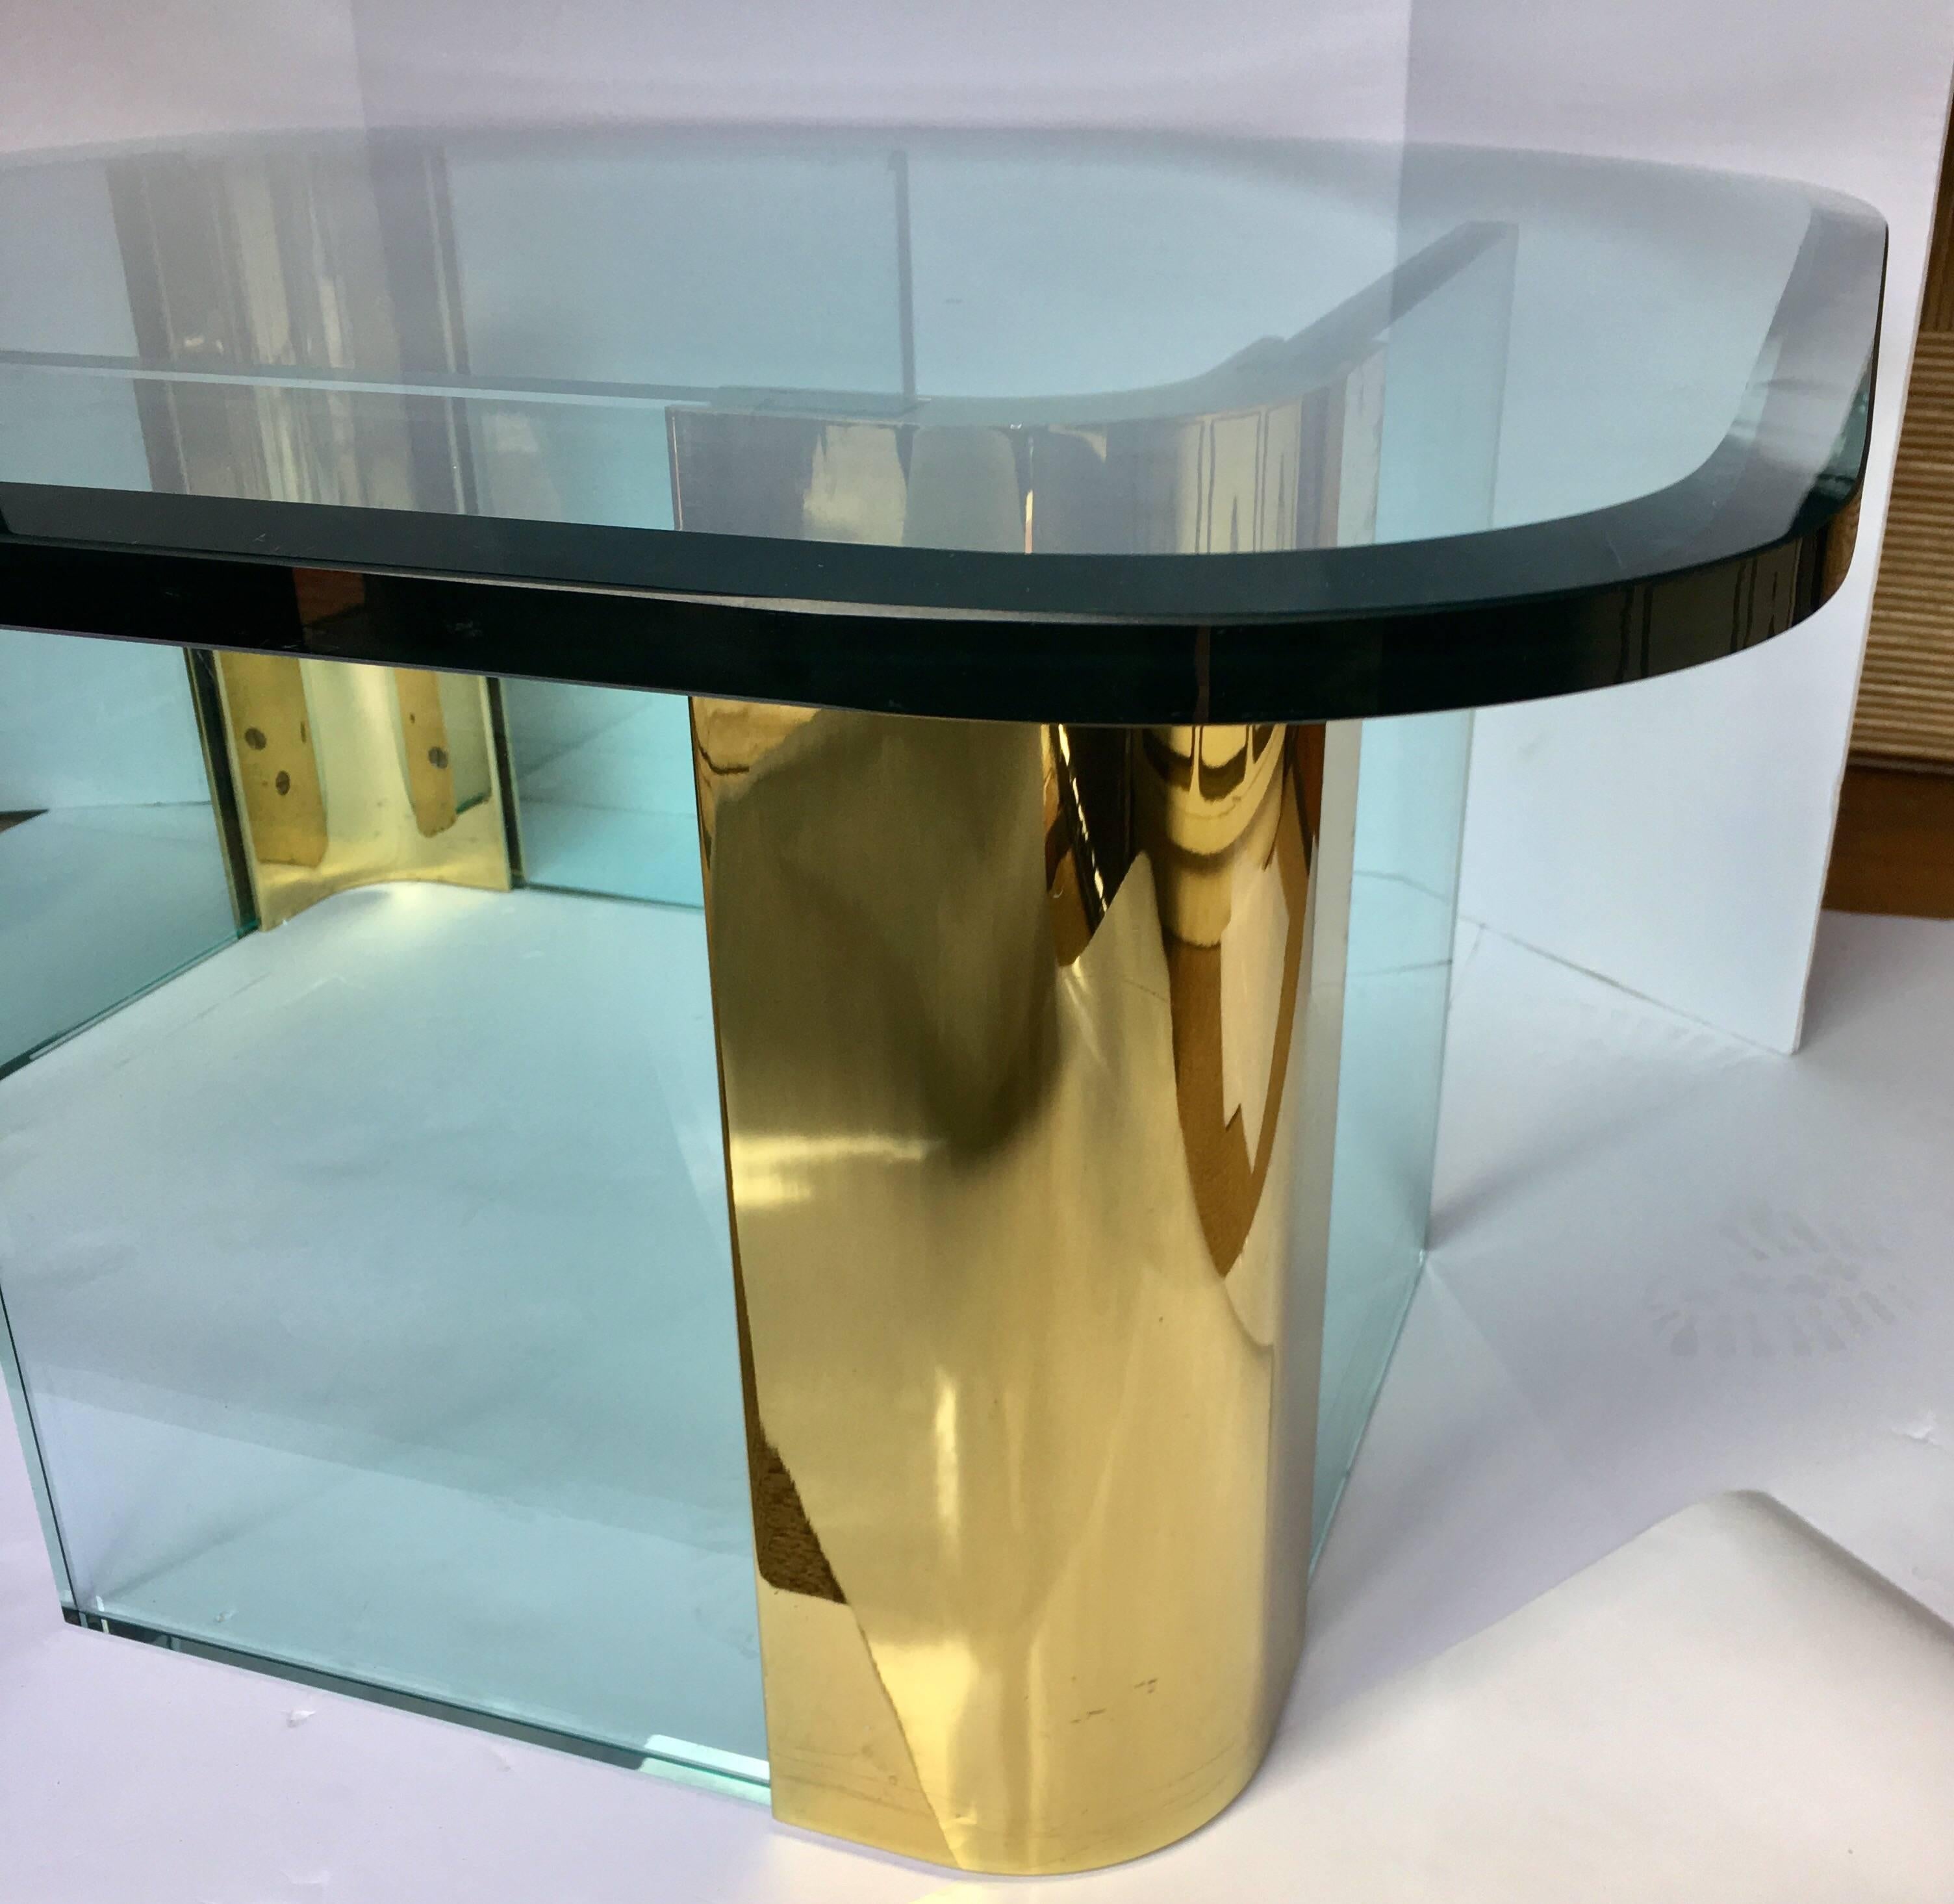 Modern asymmetrical glass and brass cocktail table in the style of Leon Rosen for Pace. Thick removable clear glass top features a rounded curved design with a beveled edge. Two free-standing base units are comprised of two vertical 3/4